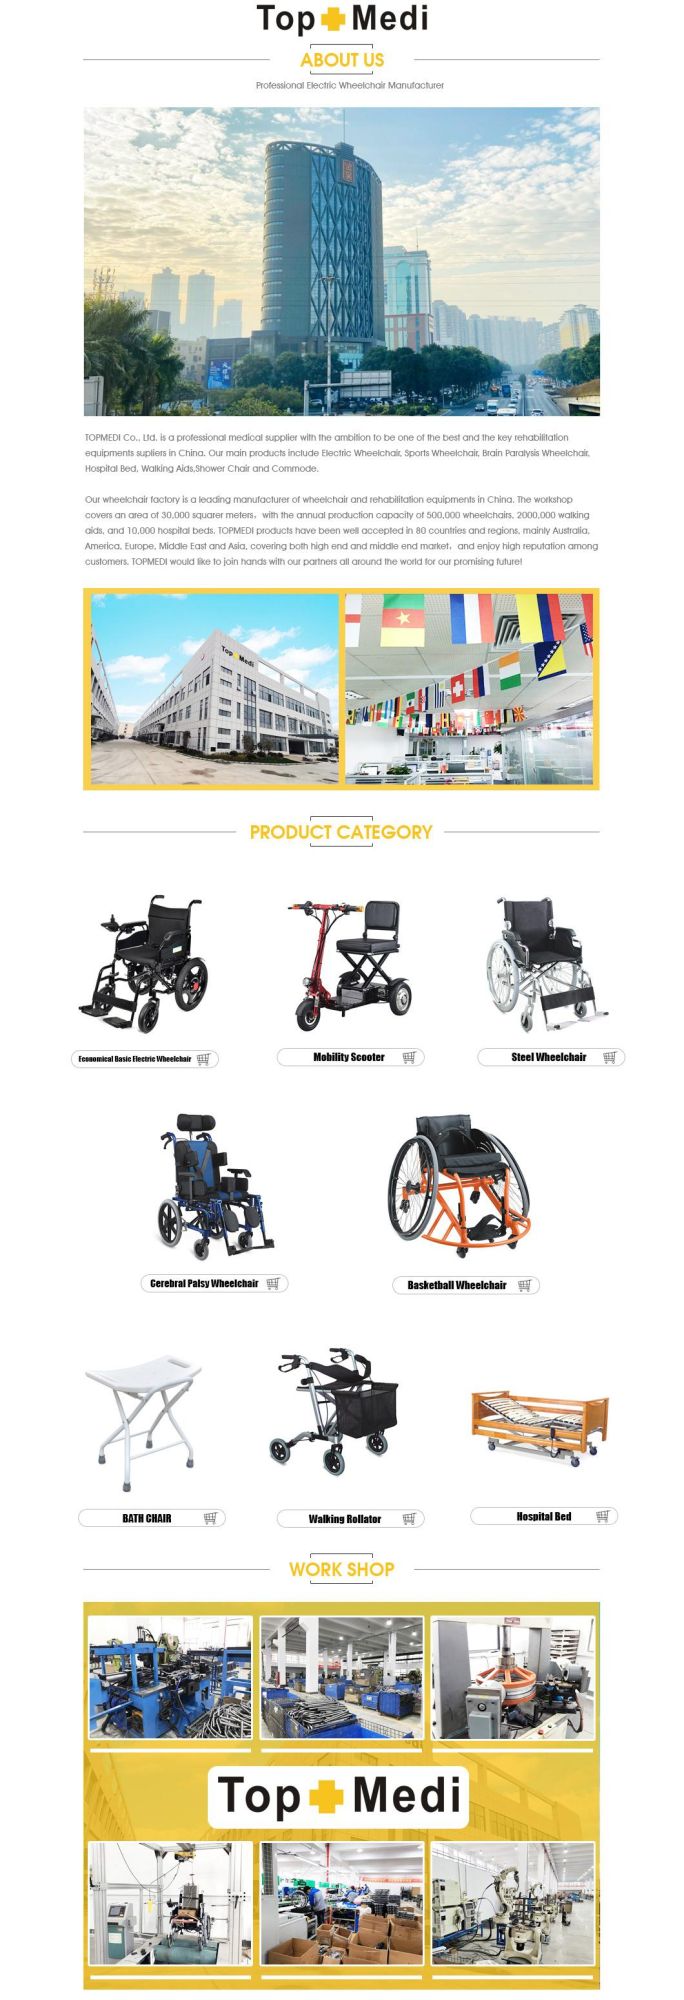 100kg Loading Capacity 58cm Overall Width Foldable Walker Rollator with Seat for The Elderly